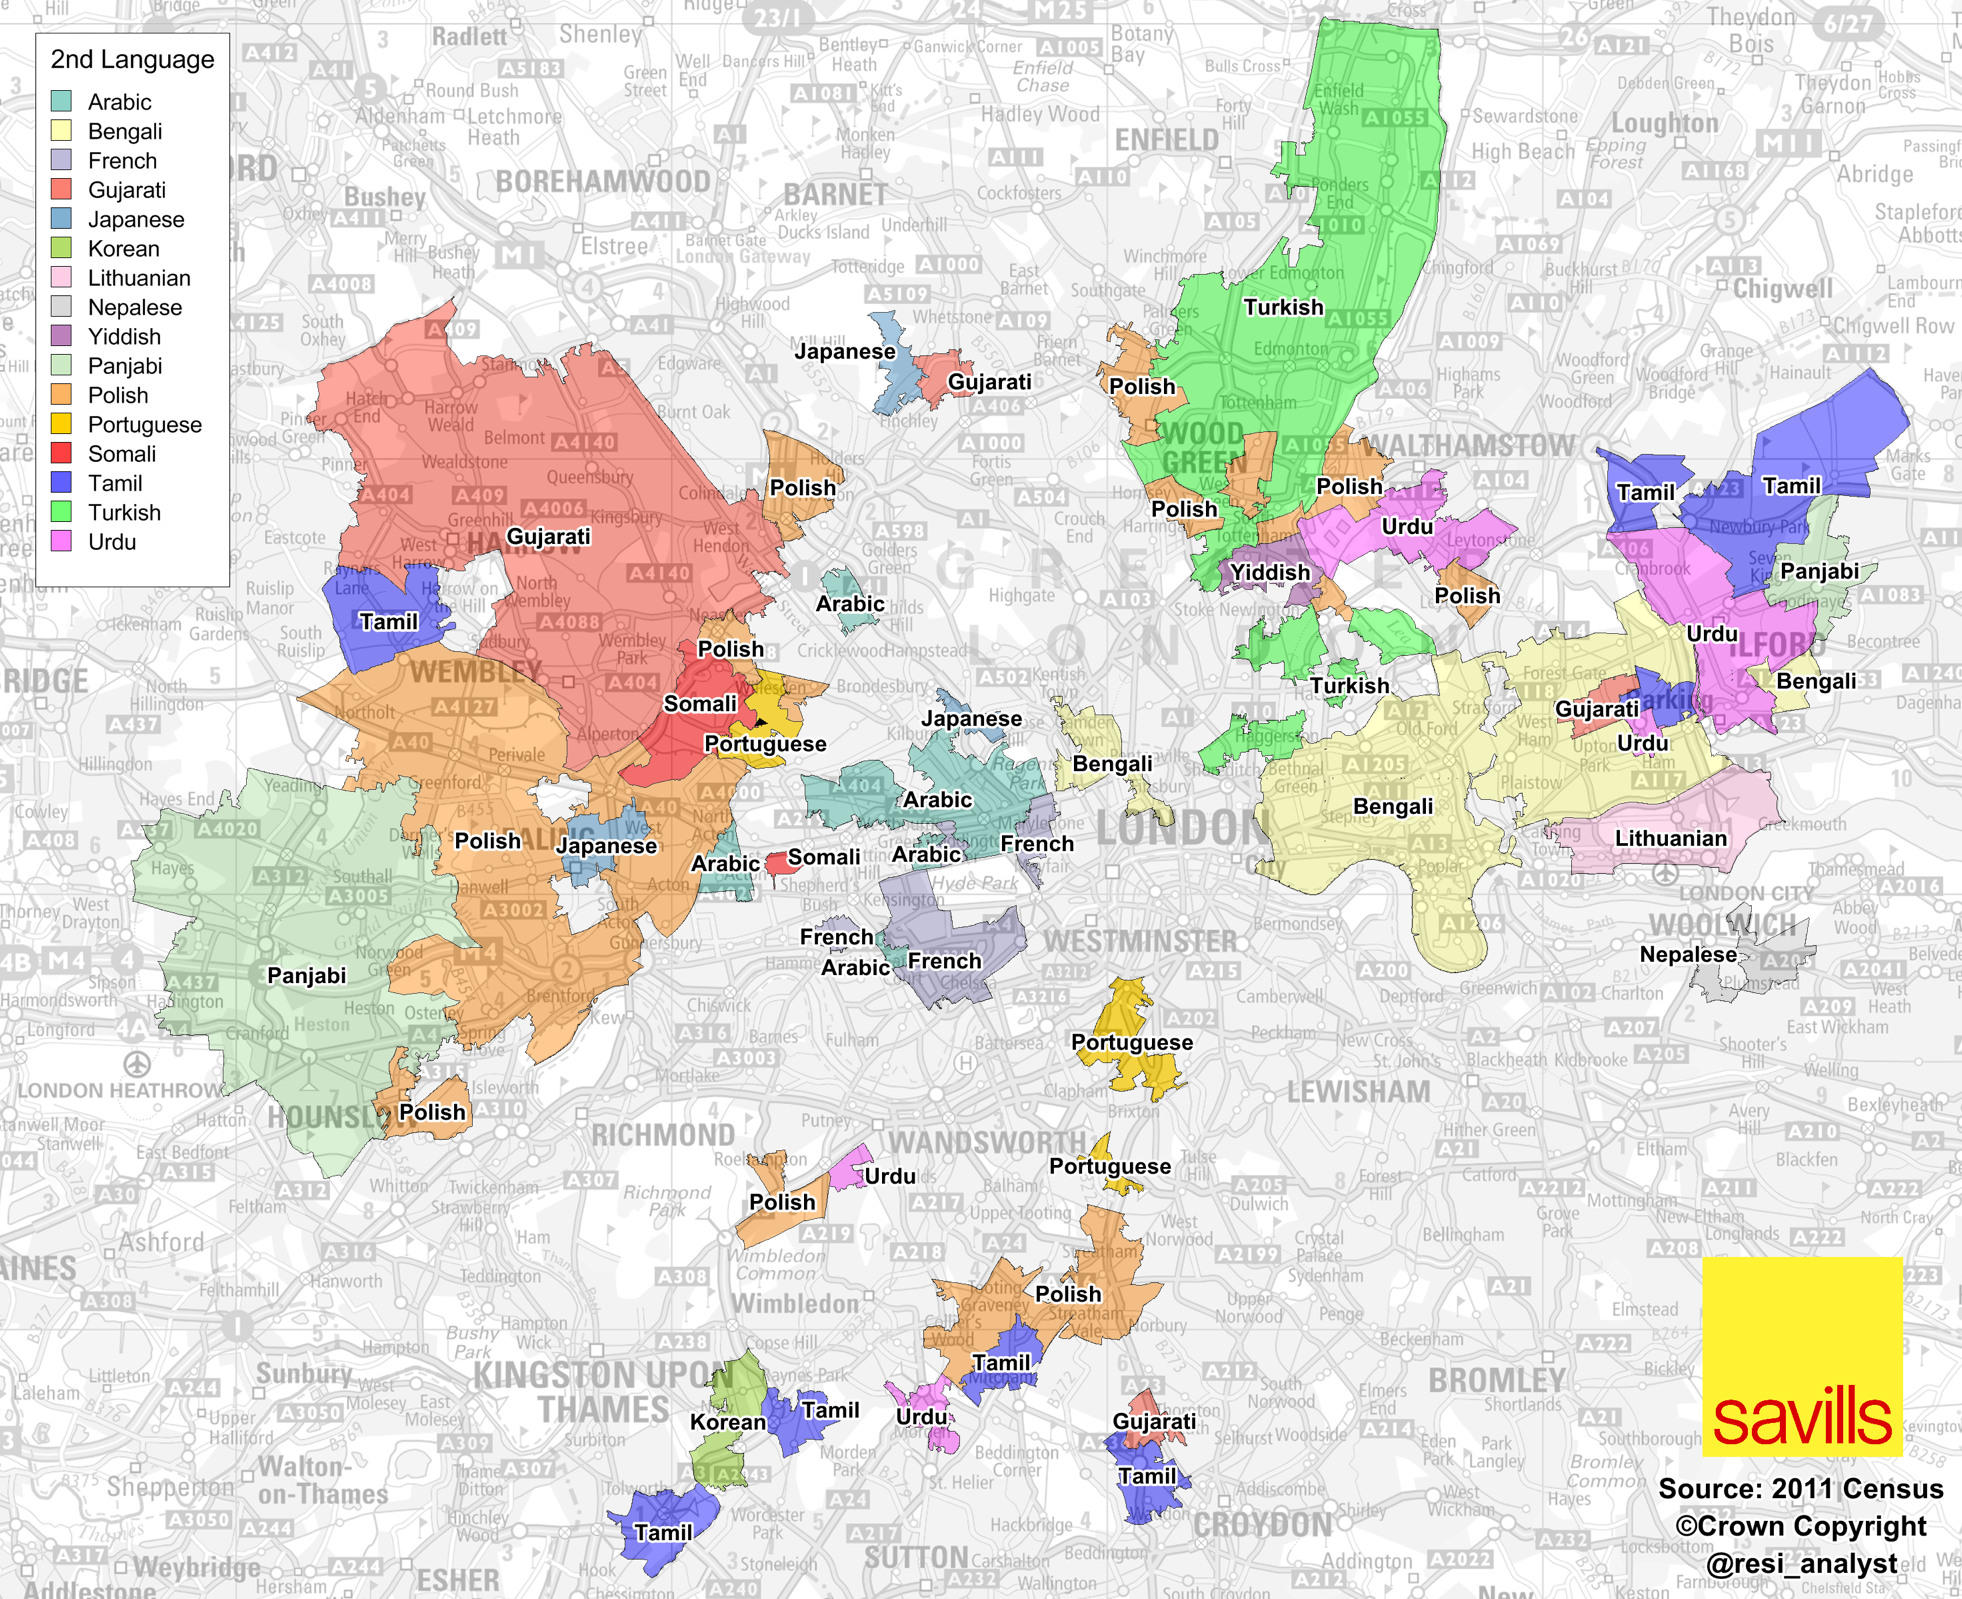 Second Languages Mapping London